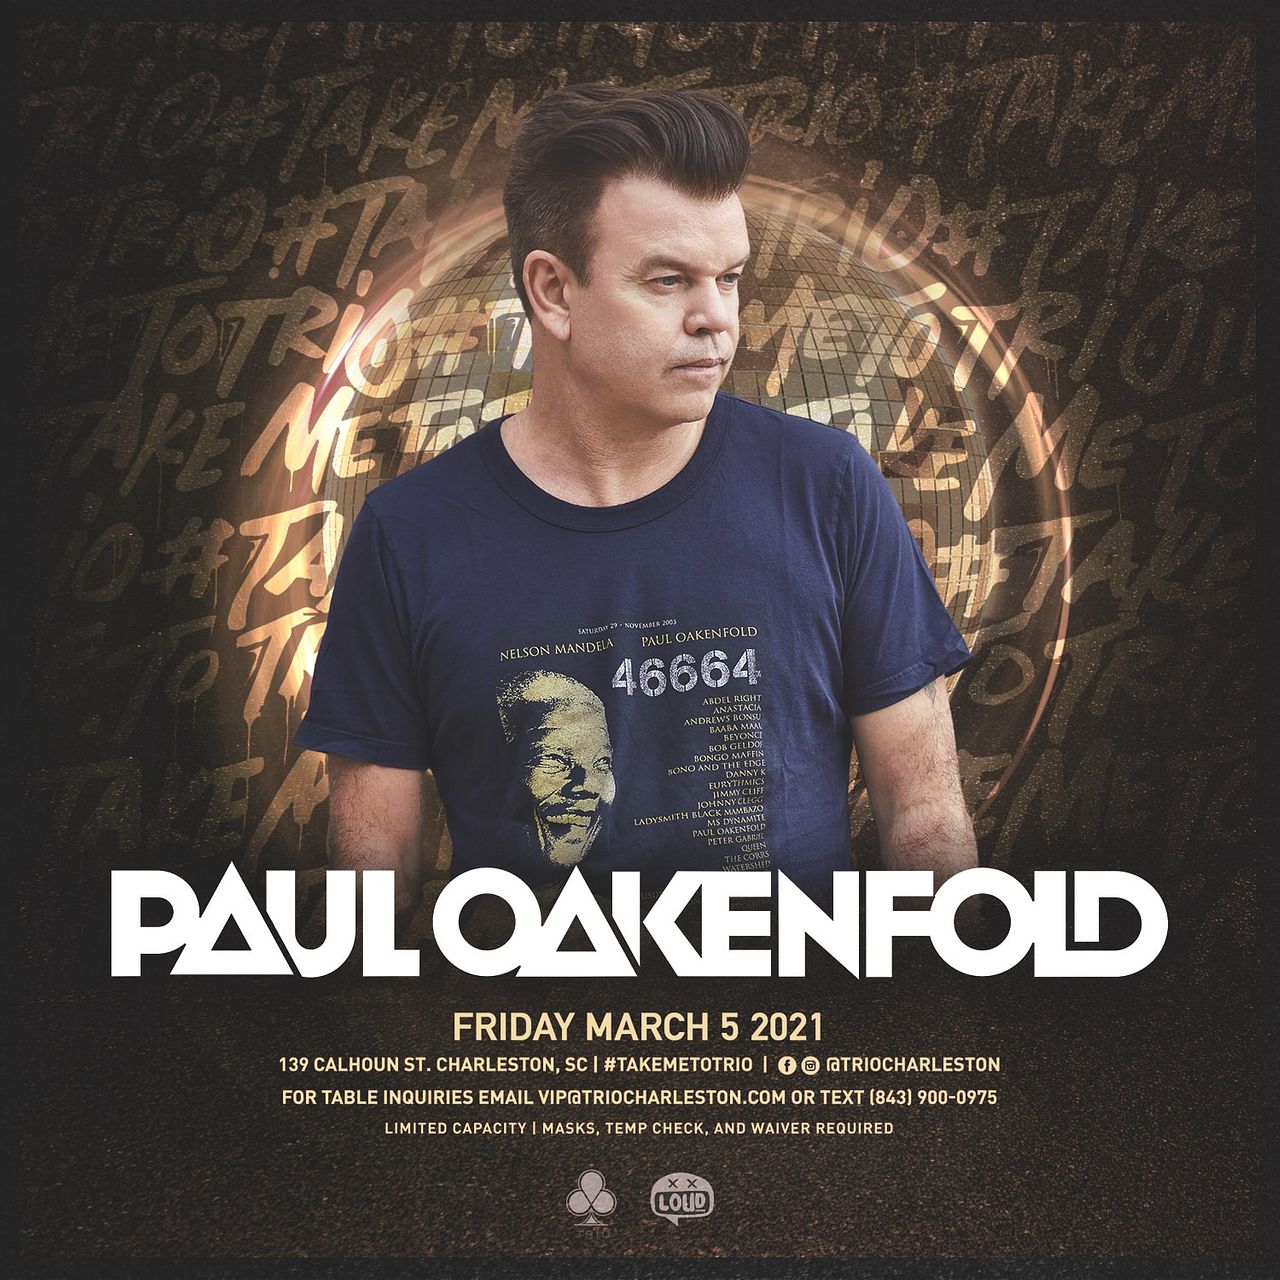 Paul Oakenfold Tickets at Trio in Charleston by Loud Crowd Charleston